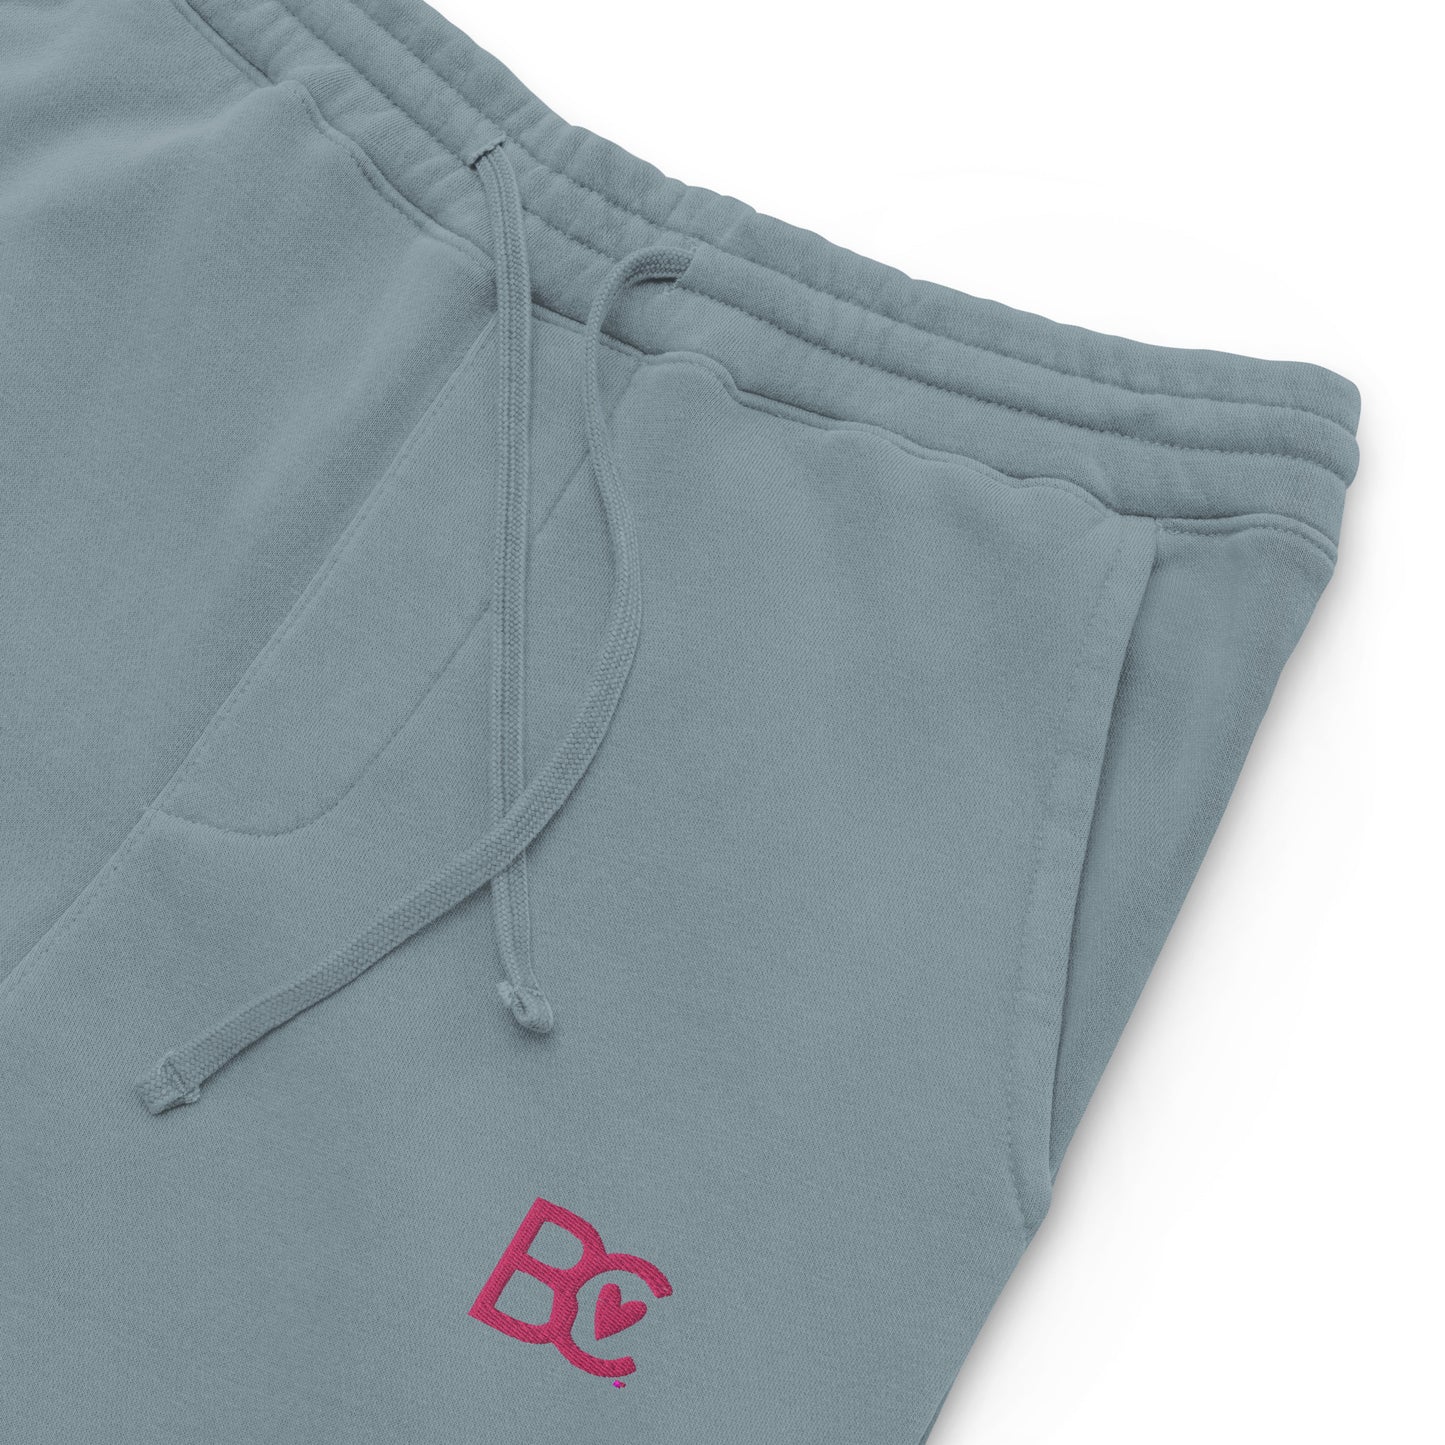 BC Dark Gray Embroidered Unisex Pigment-dyed Joggers